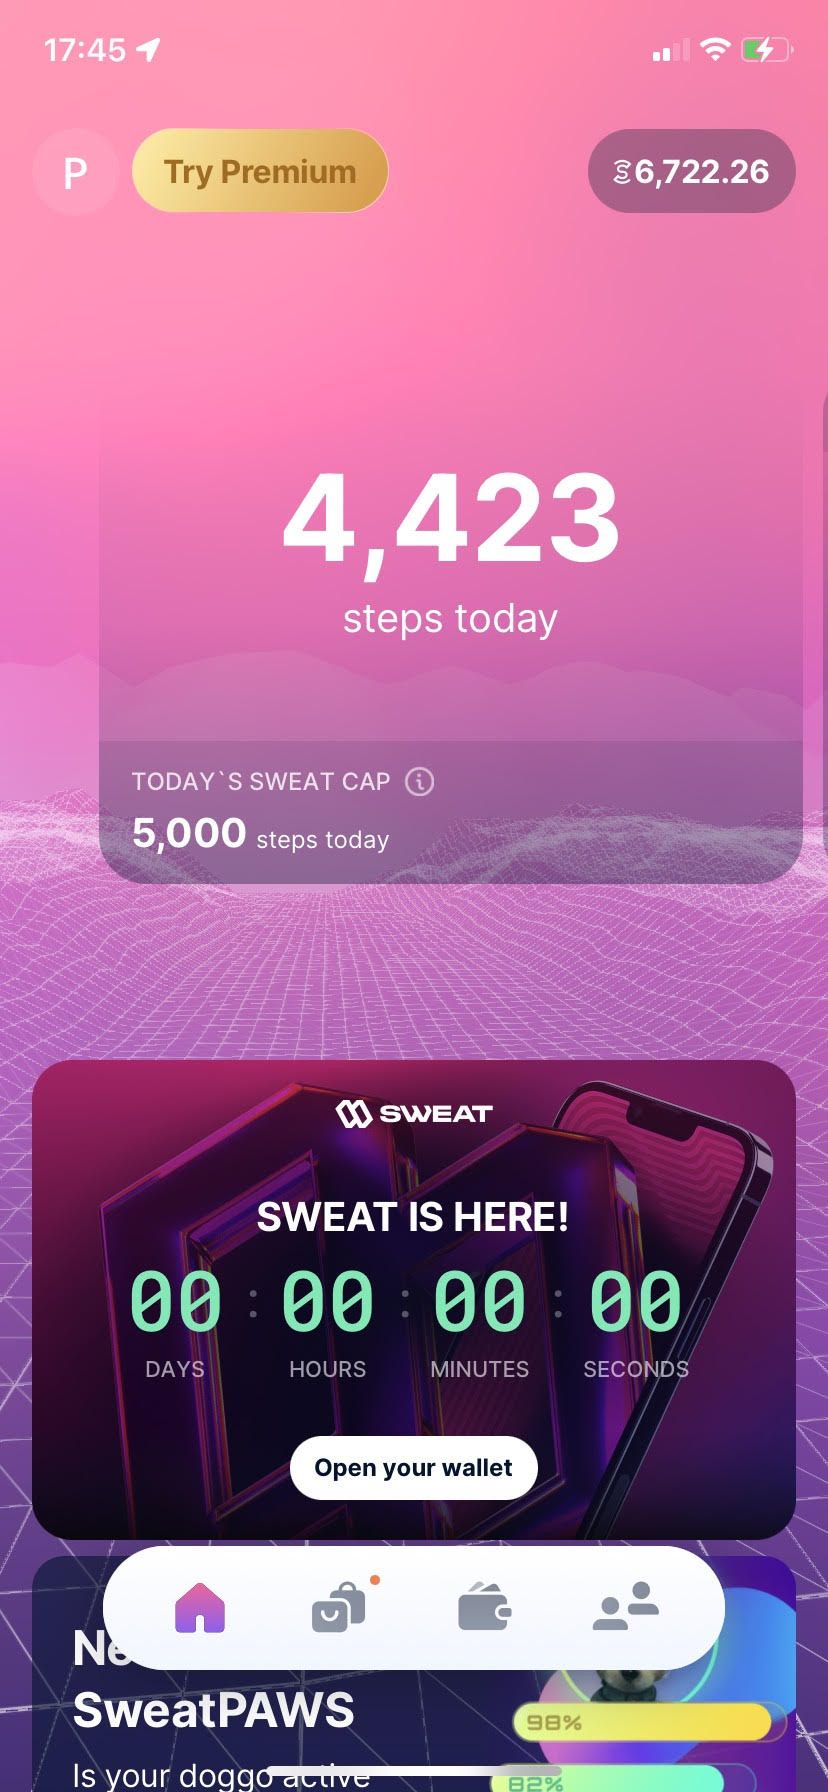 Dashboard showing how many steps where taken today